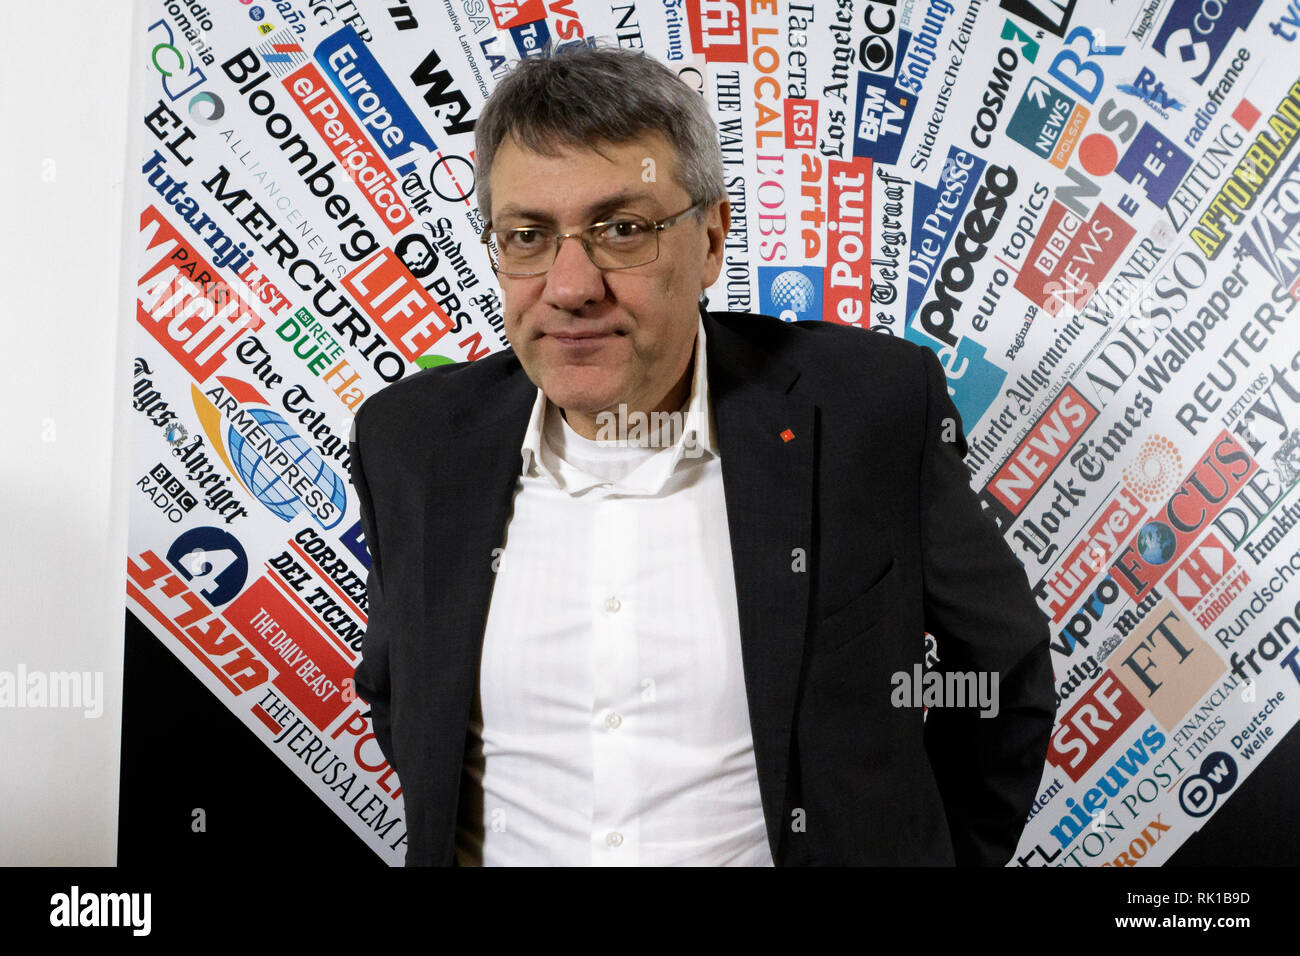 Rome, Italy. 08th Feb, 2019. Maurizio Landini, CGIL trade union Secretary, attends a press conference at Foreign Press Association in Rome, Italy on February 08, 2019. CGIL, CISL and UIL (Italy's major trade unions) will take part in a national demonstration, scheduled for February 9, to protest against the economic policy of the Italian government. Credit: Giuseppe Ciccia/Pacific Press/Alamy Live News Stock Photo